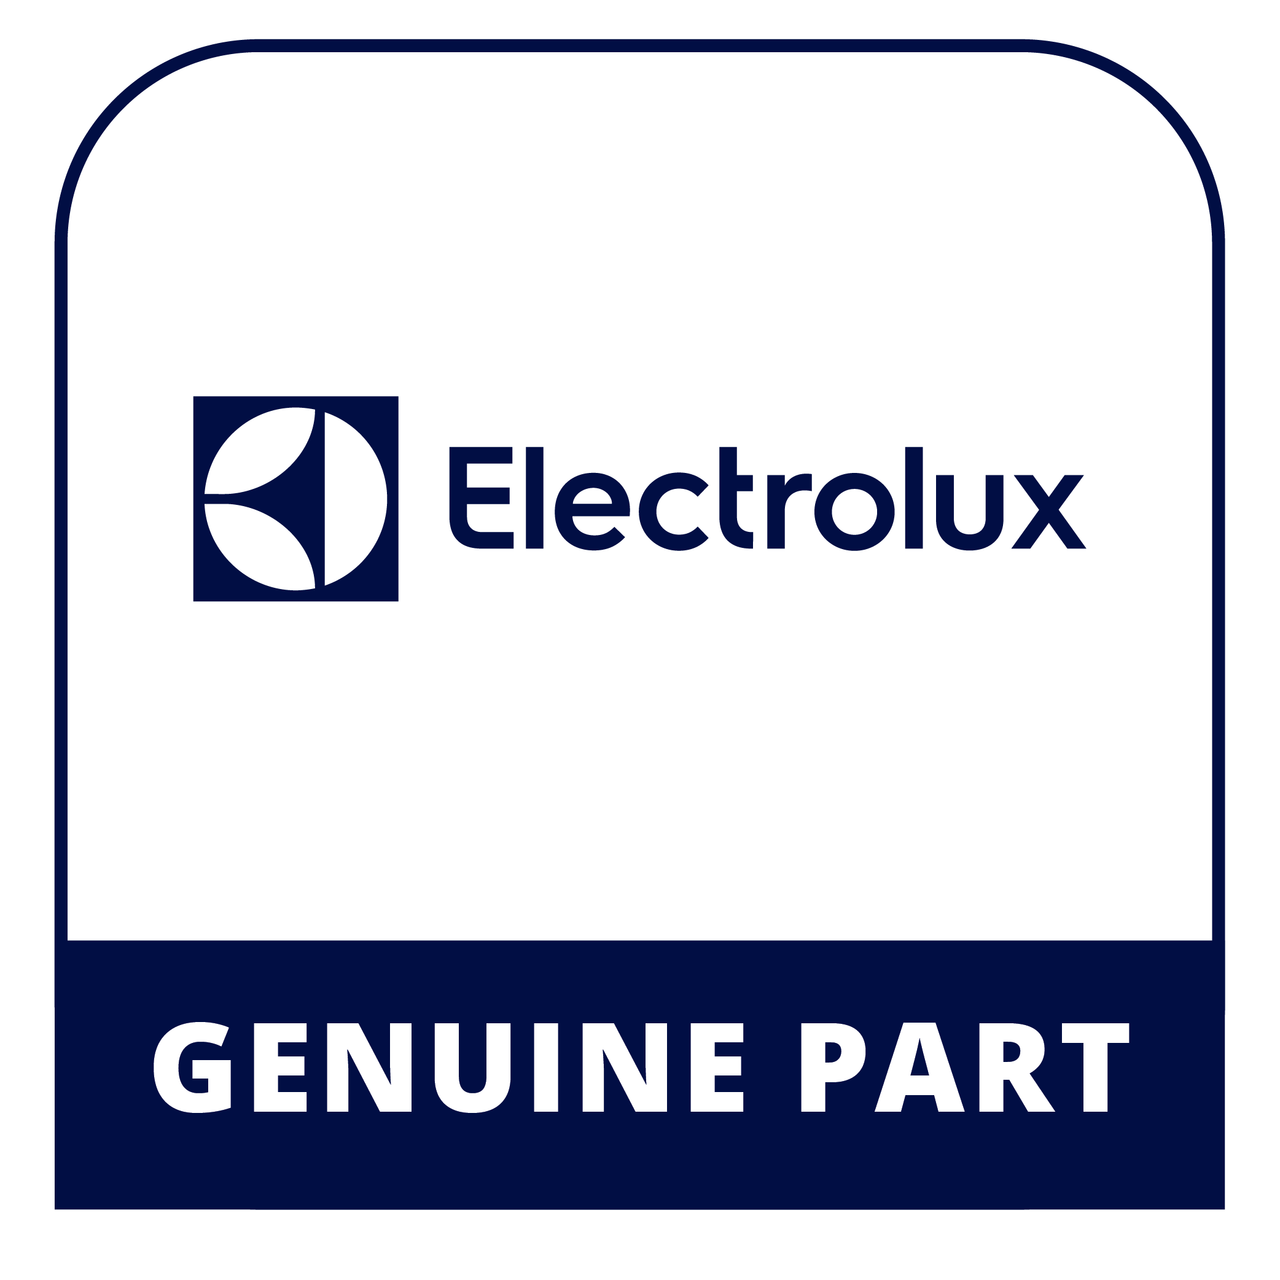 Frigidaire - Electrolux 316417312 Owners Manual - Genuine Electrolux Part